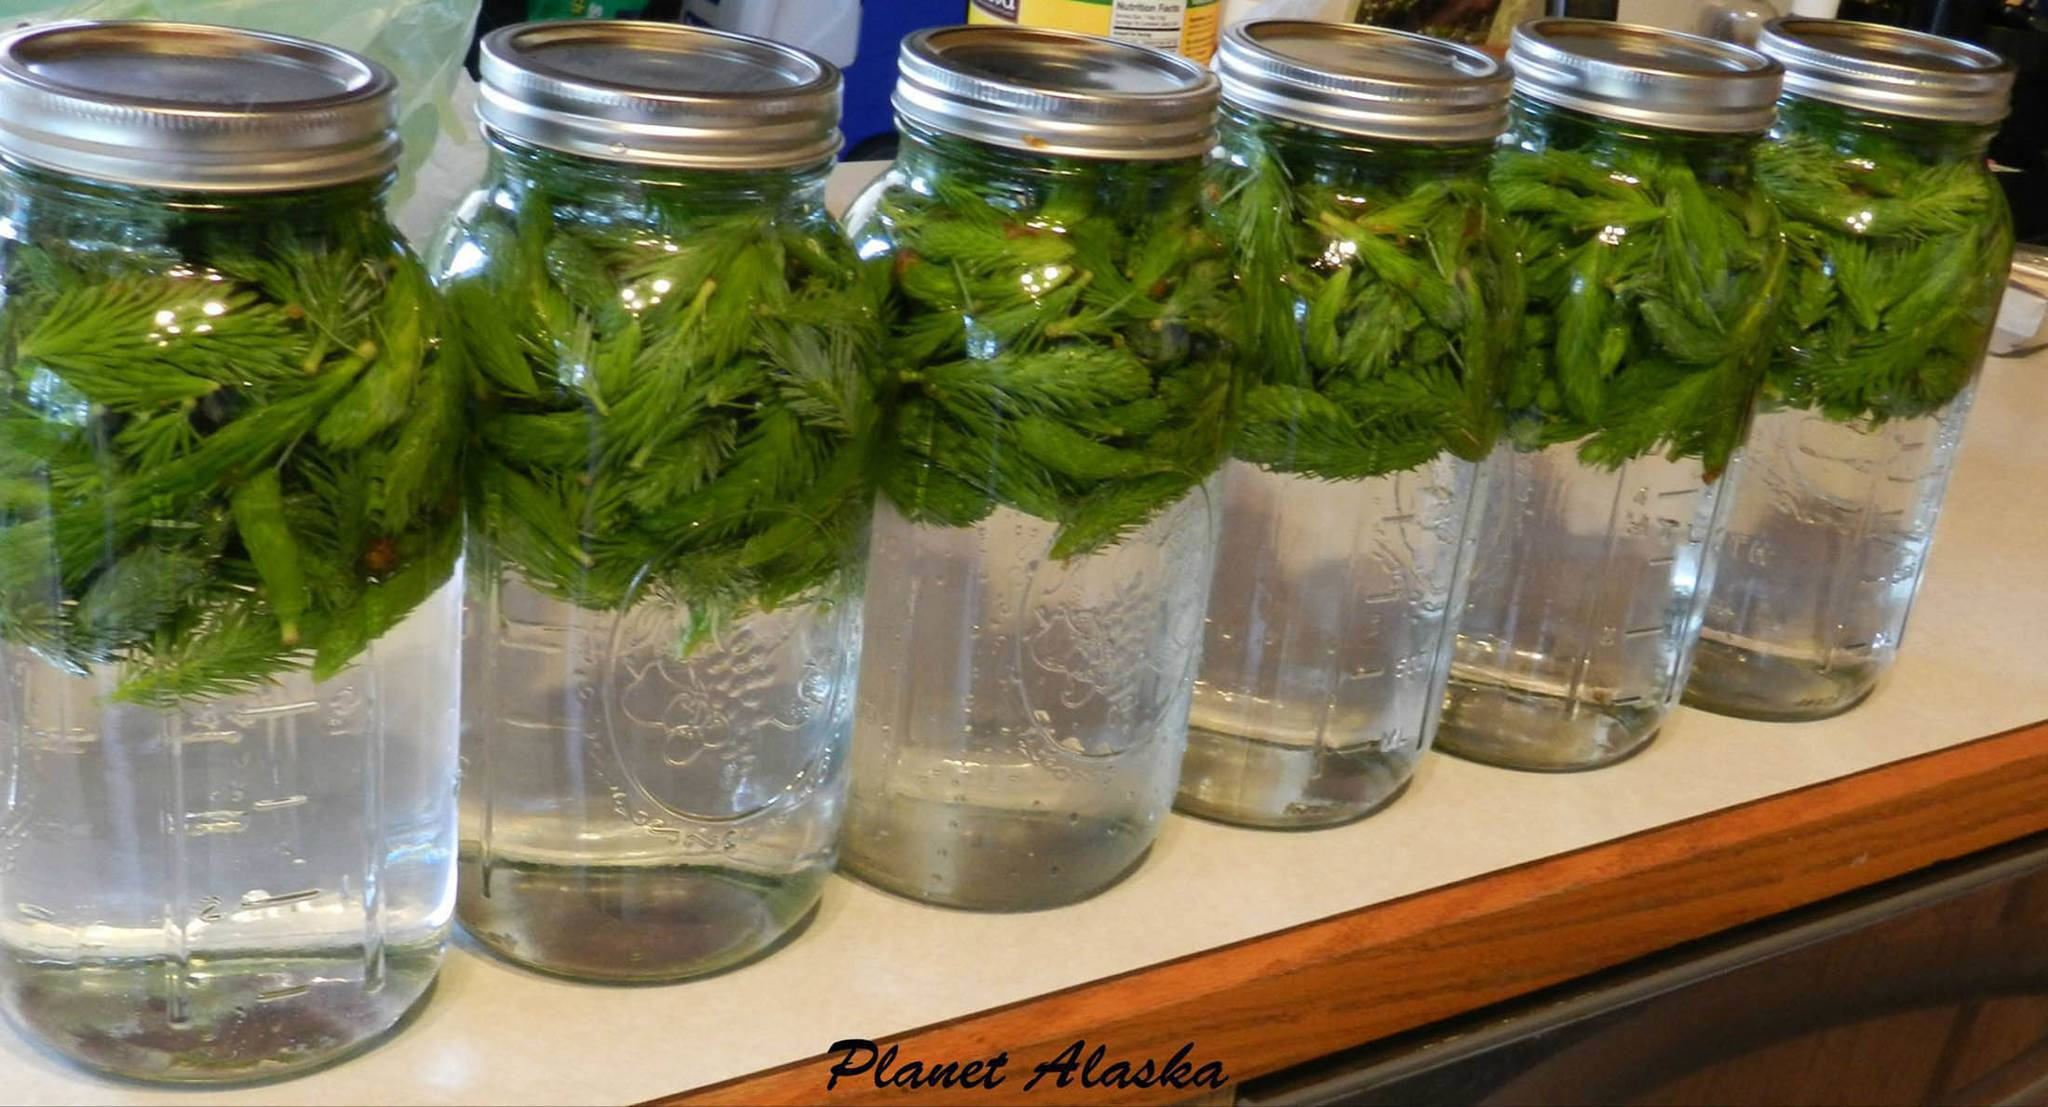 Spruce tips infuse their flavor into water. Photo by Vivian Mork.